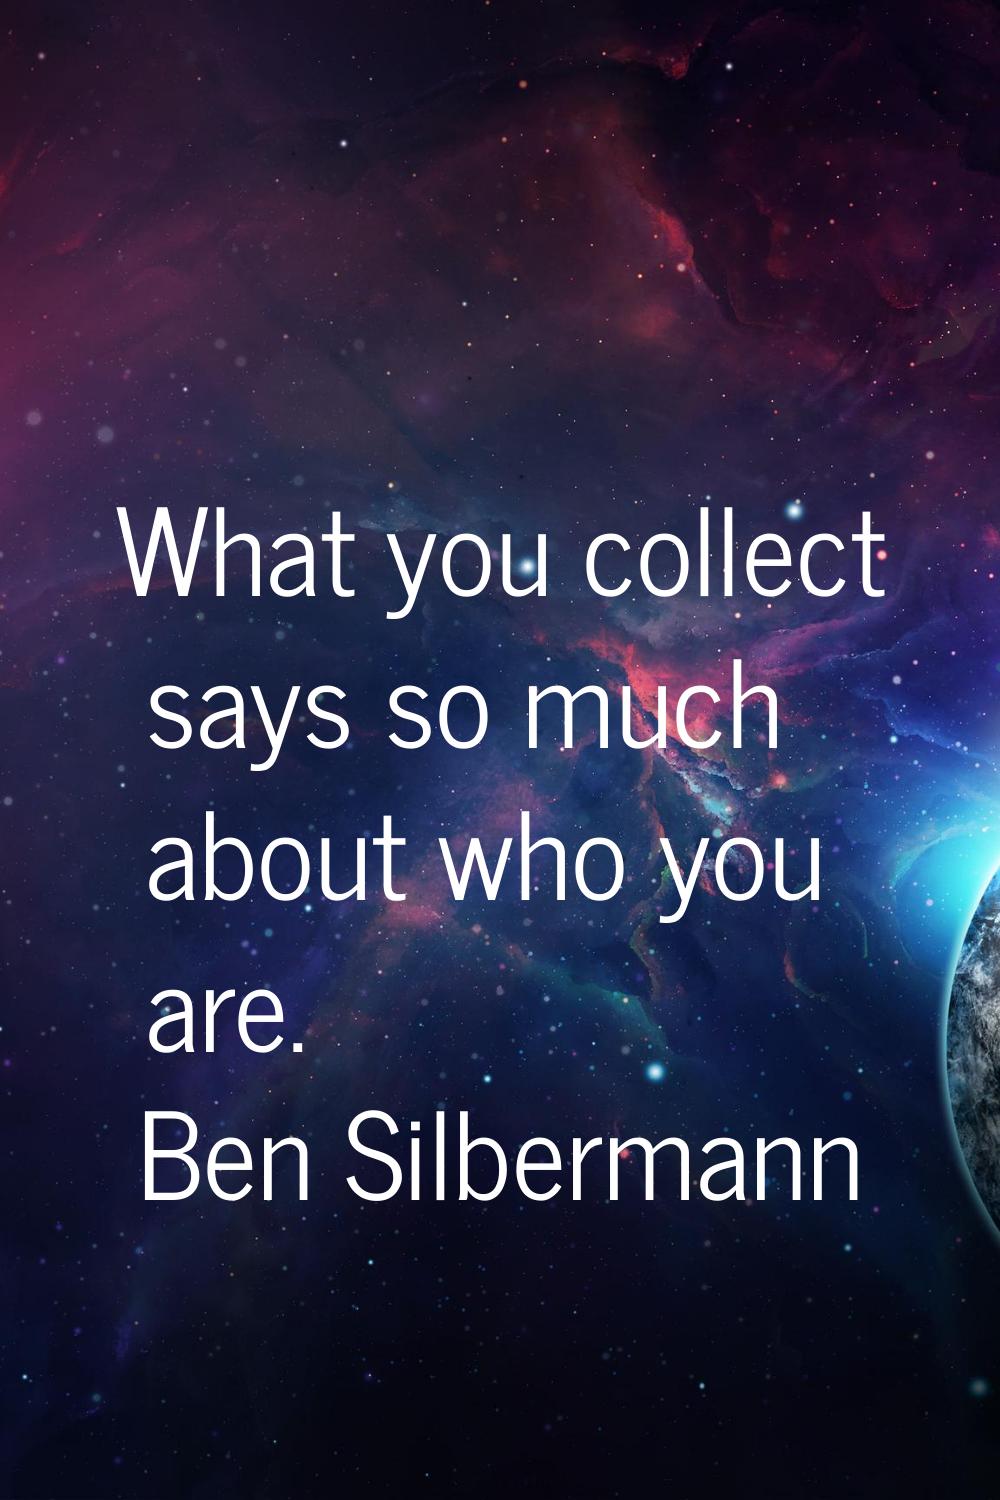 What you collect says so much about who you are.